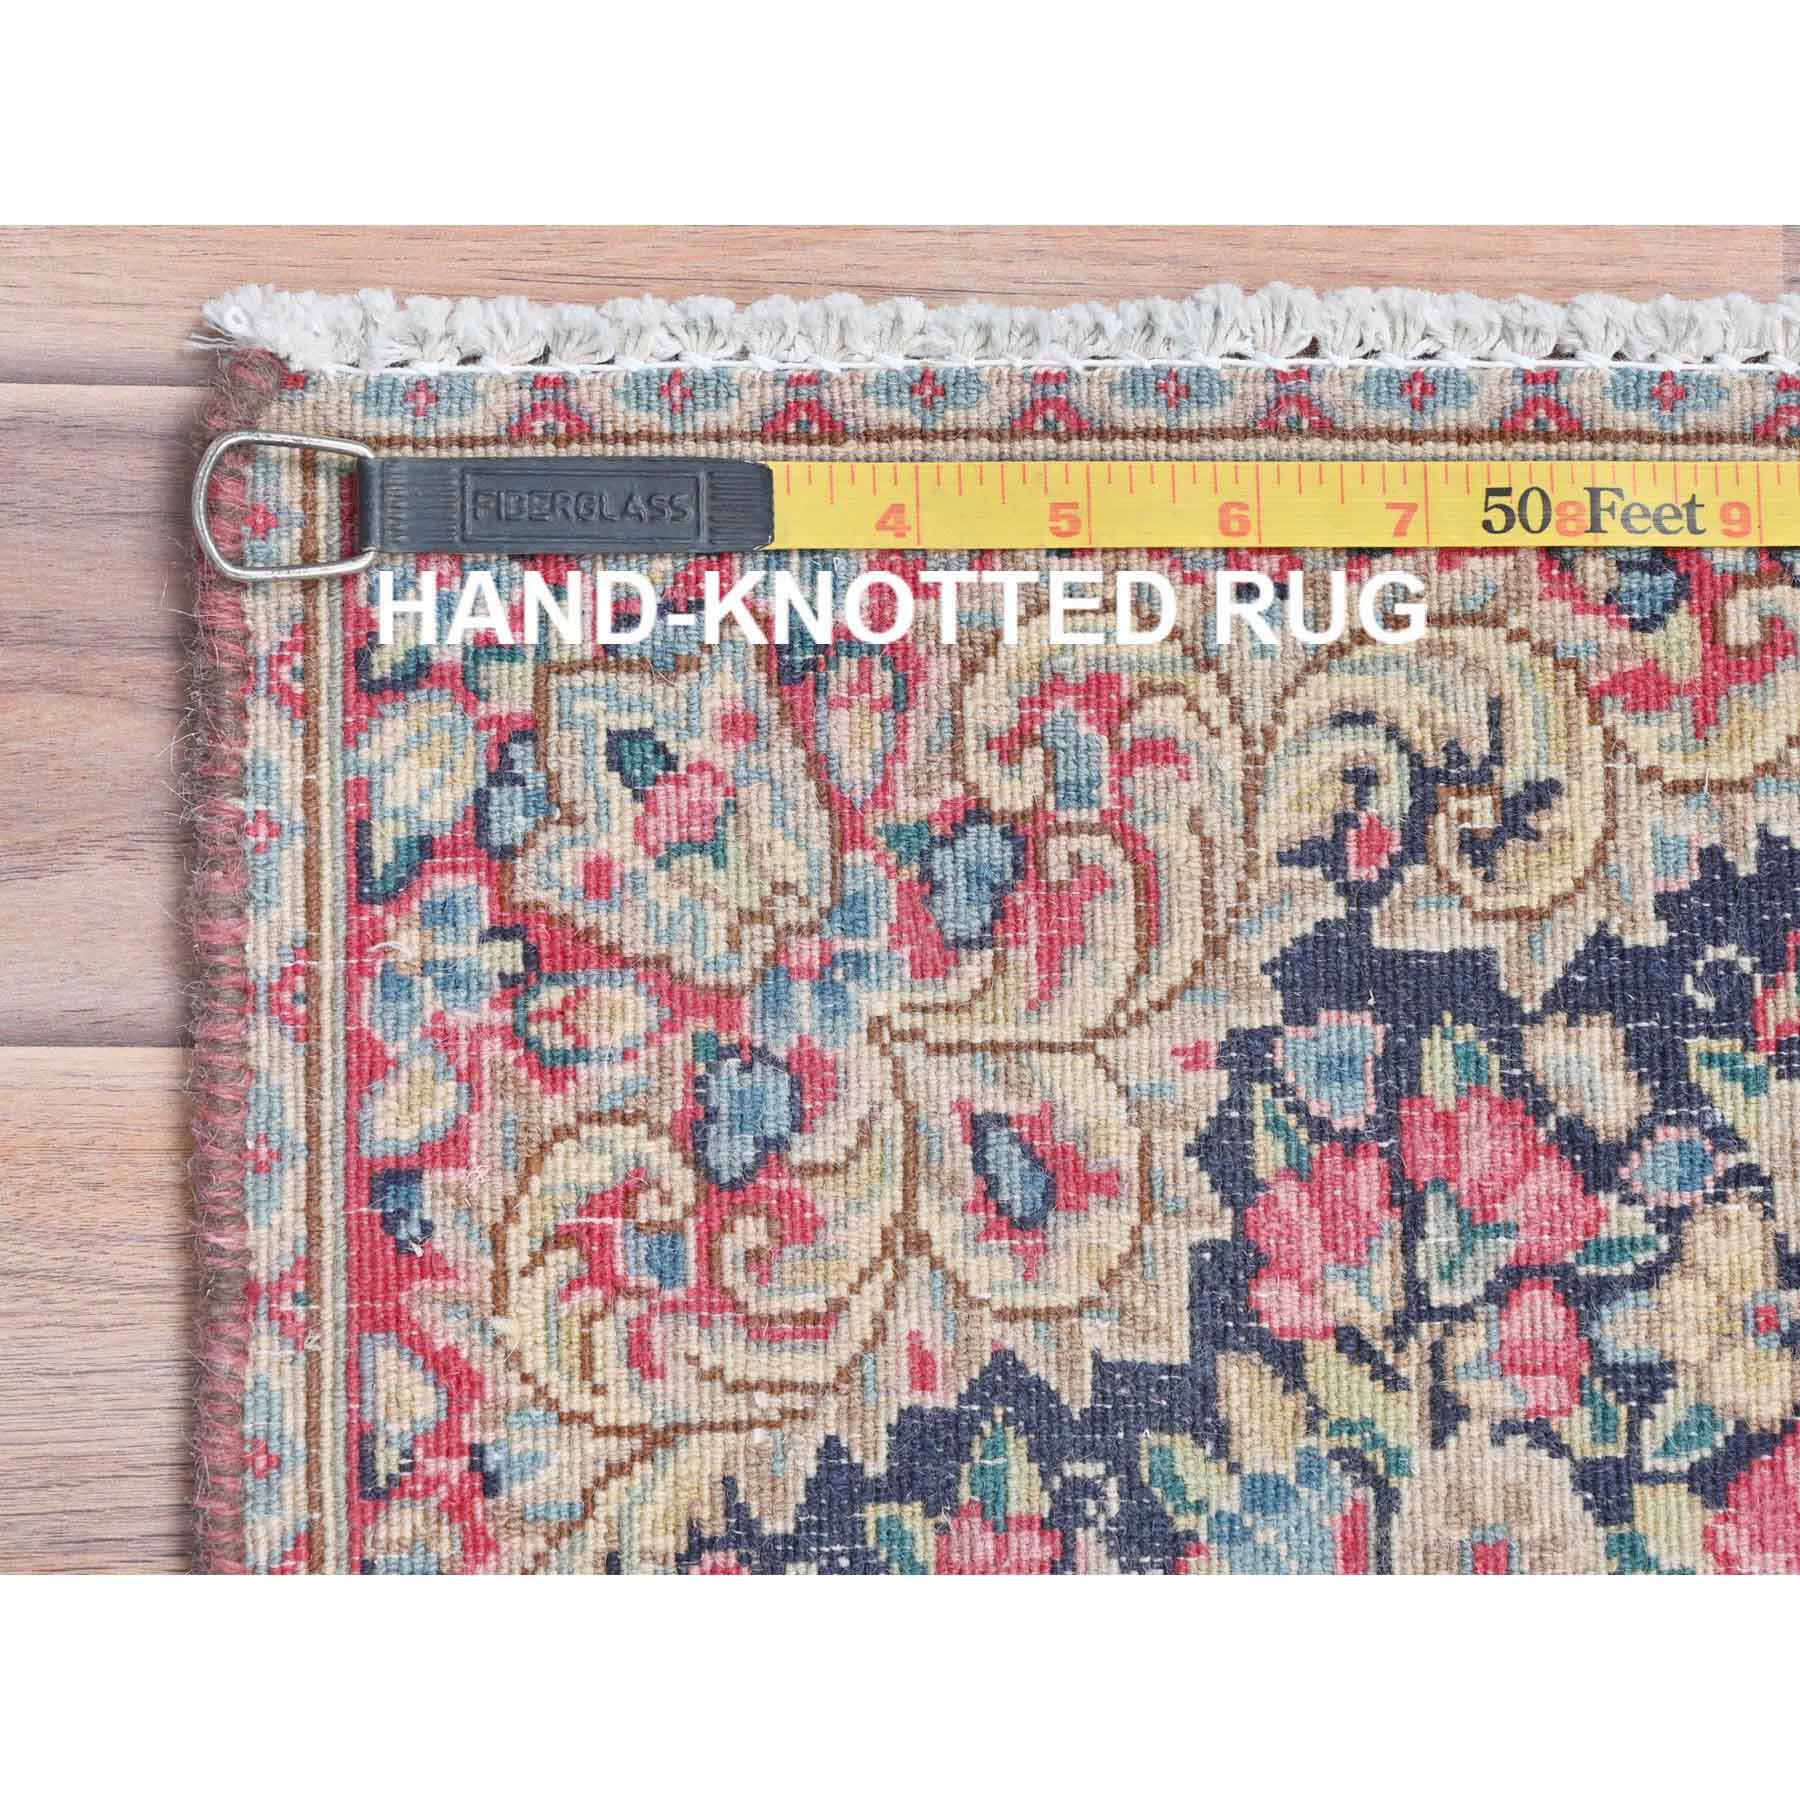 Overdyed-Vintage-Hand-Knotted-Rug-409785